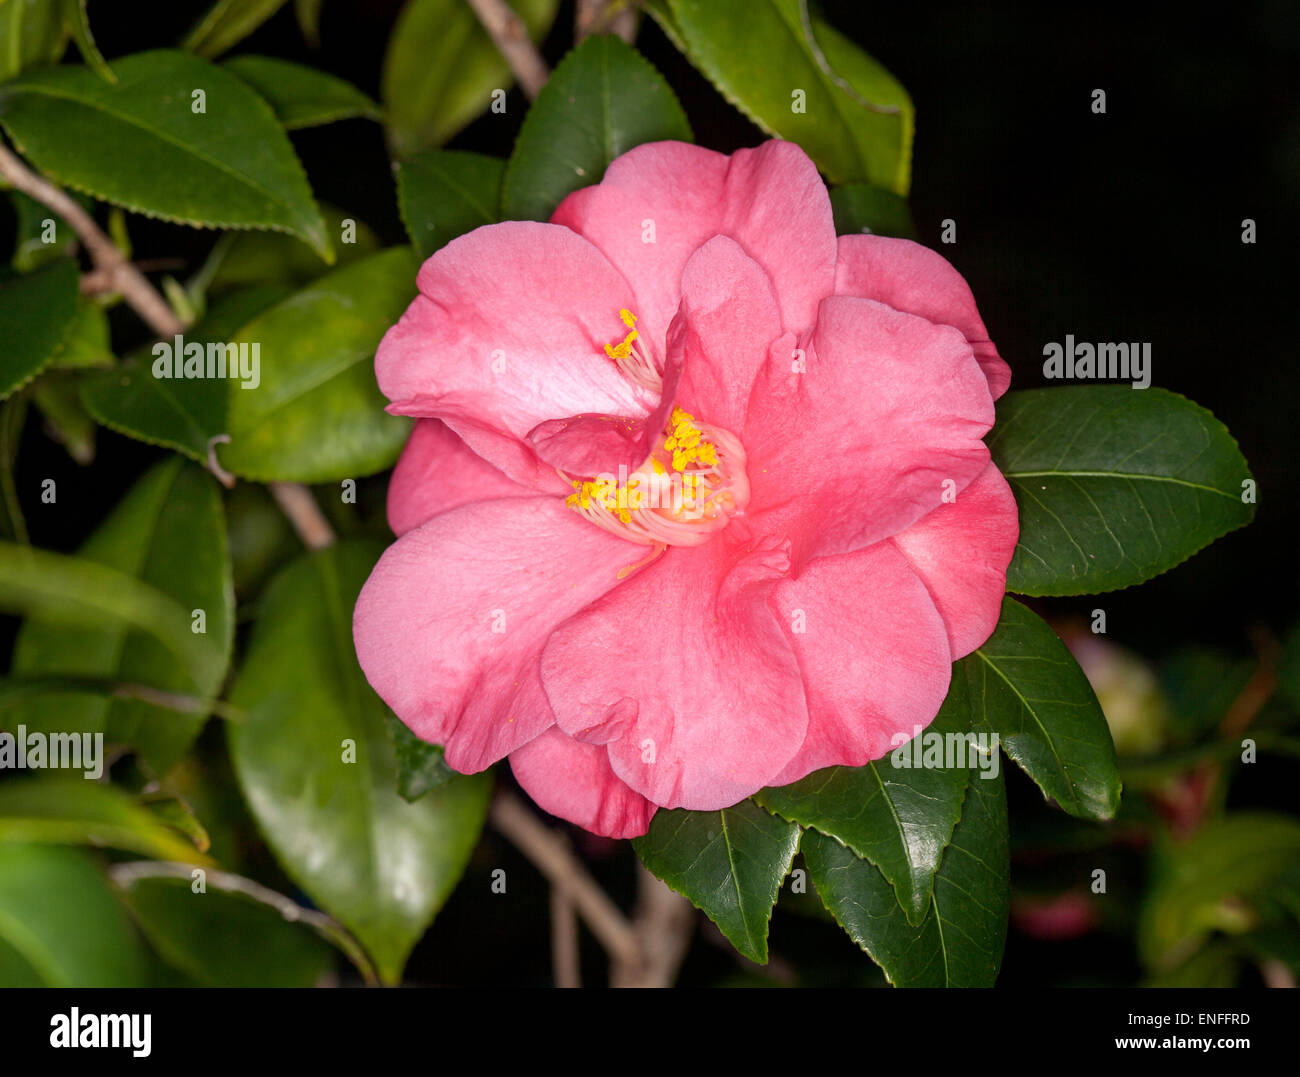 Pink flower of Camellia sasanqua surrounded by dark green glossy leaves of evergreen shrub grown from seed Stock Photo